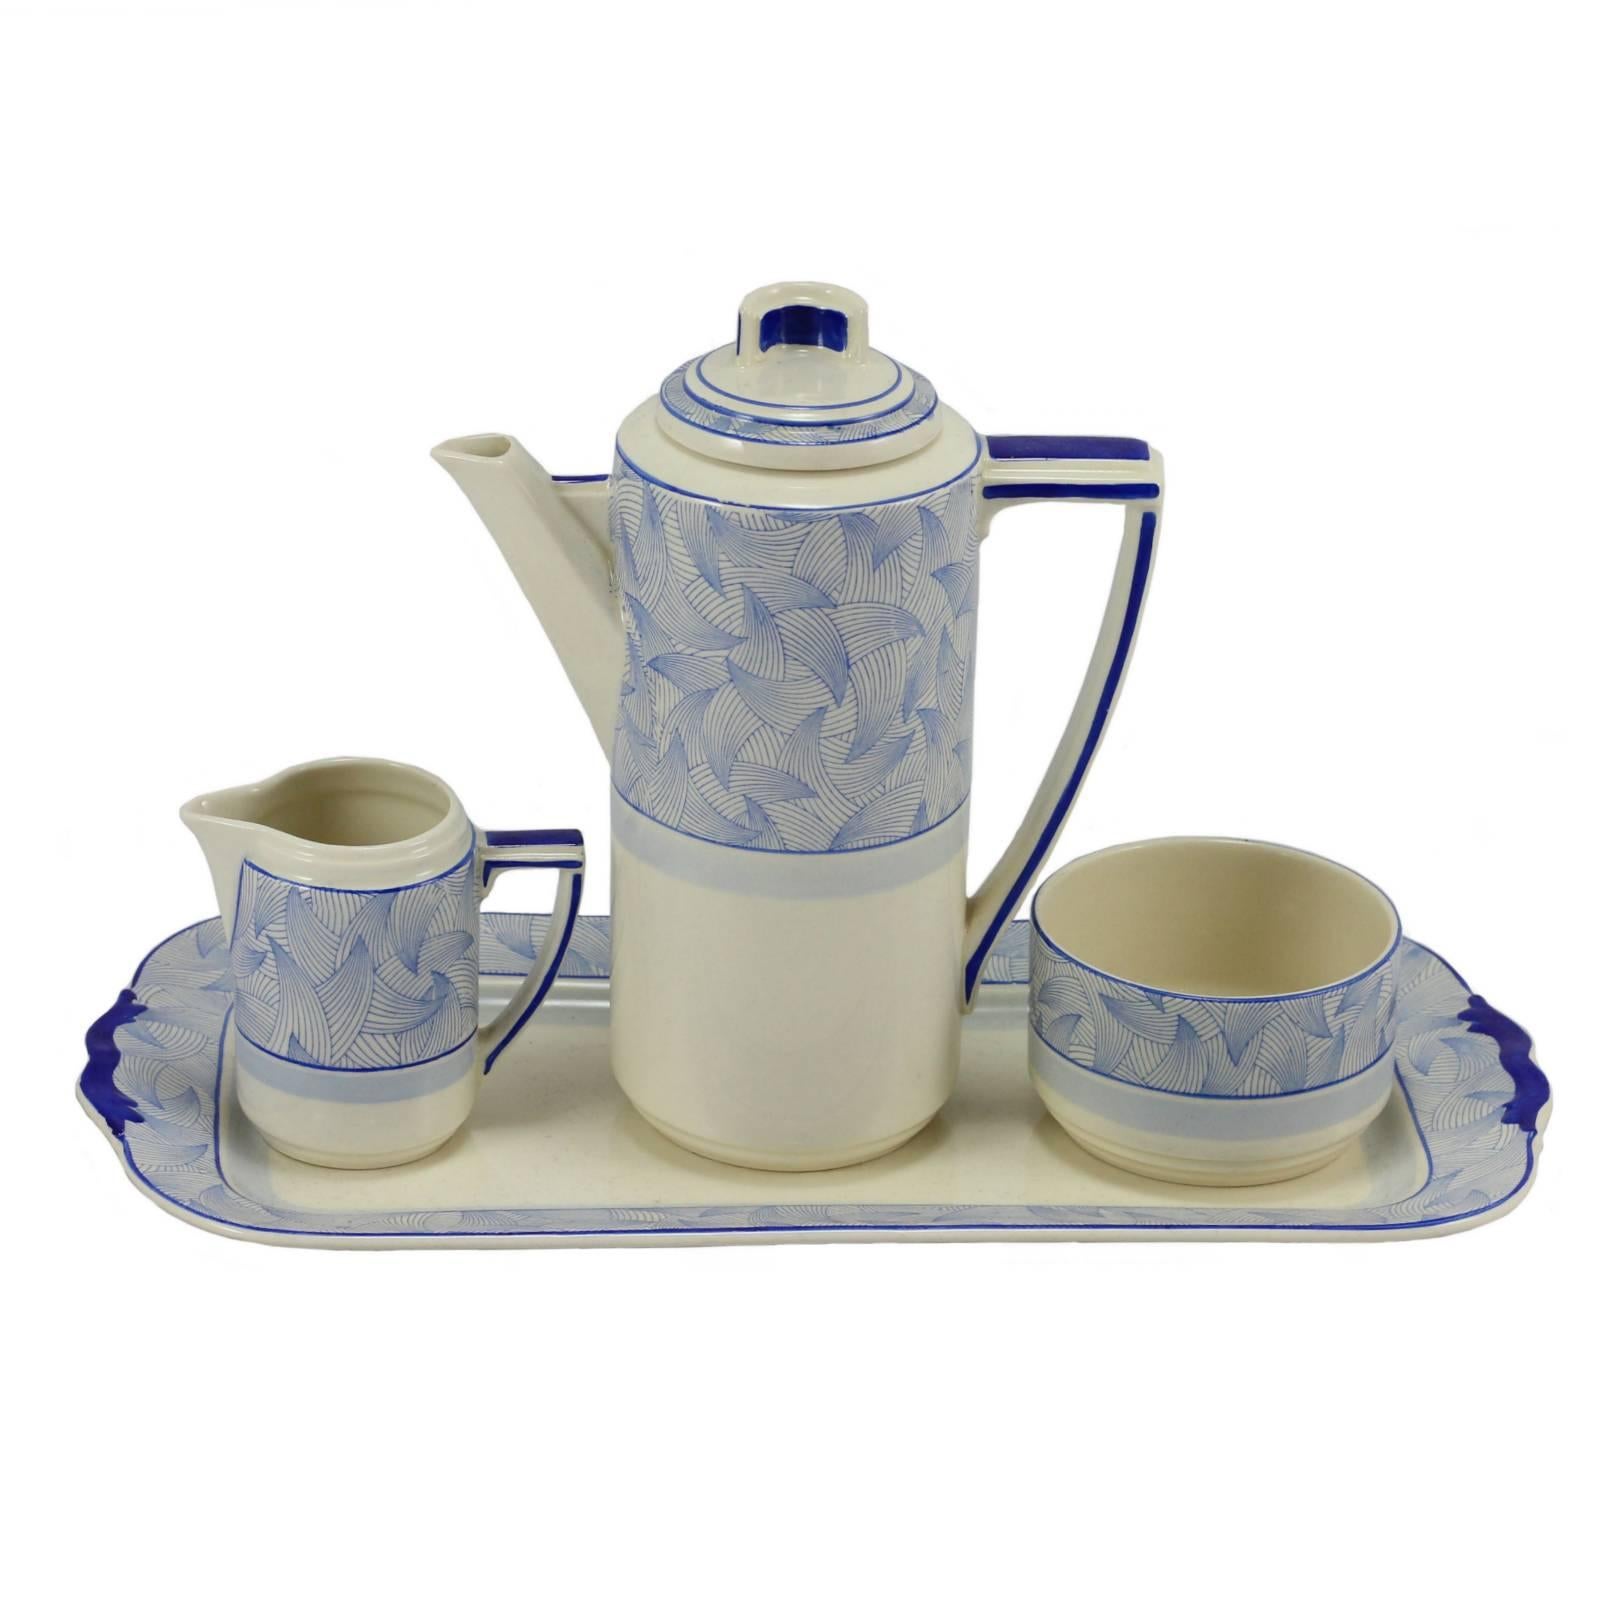 As part of Royal Doulton's foray into the Art Deco style, the Envoy coffee set serves as a prime example of early 20th century modernism with unusual geometric handles, a simple yet striking repeating pattern and a bold use of colour. Sleek and